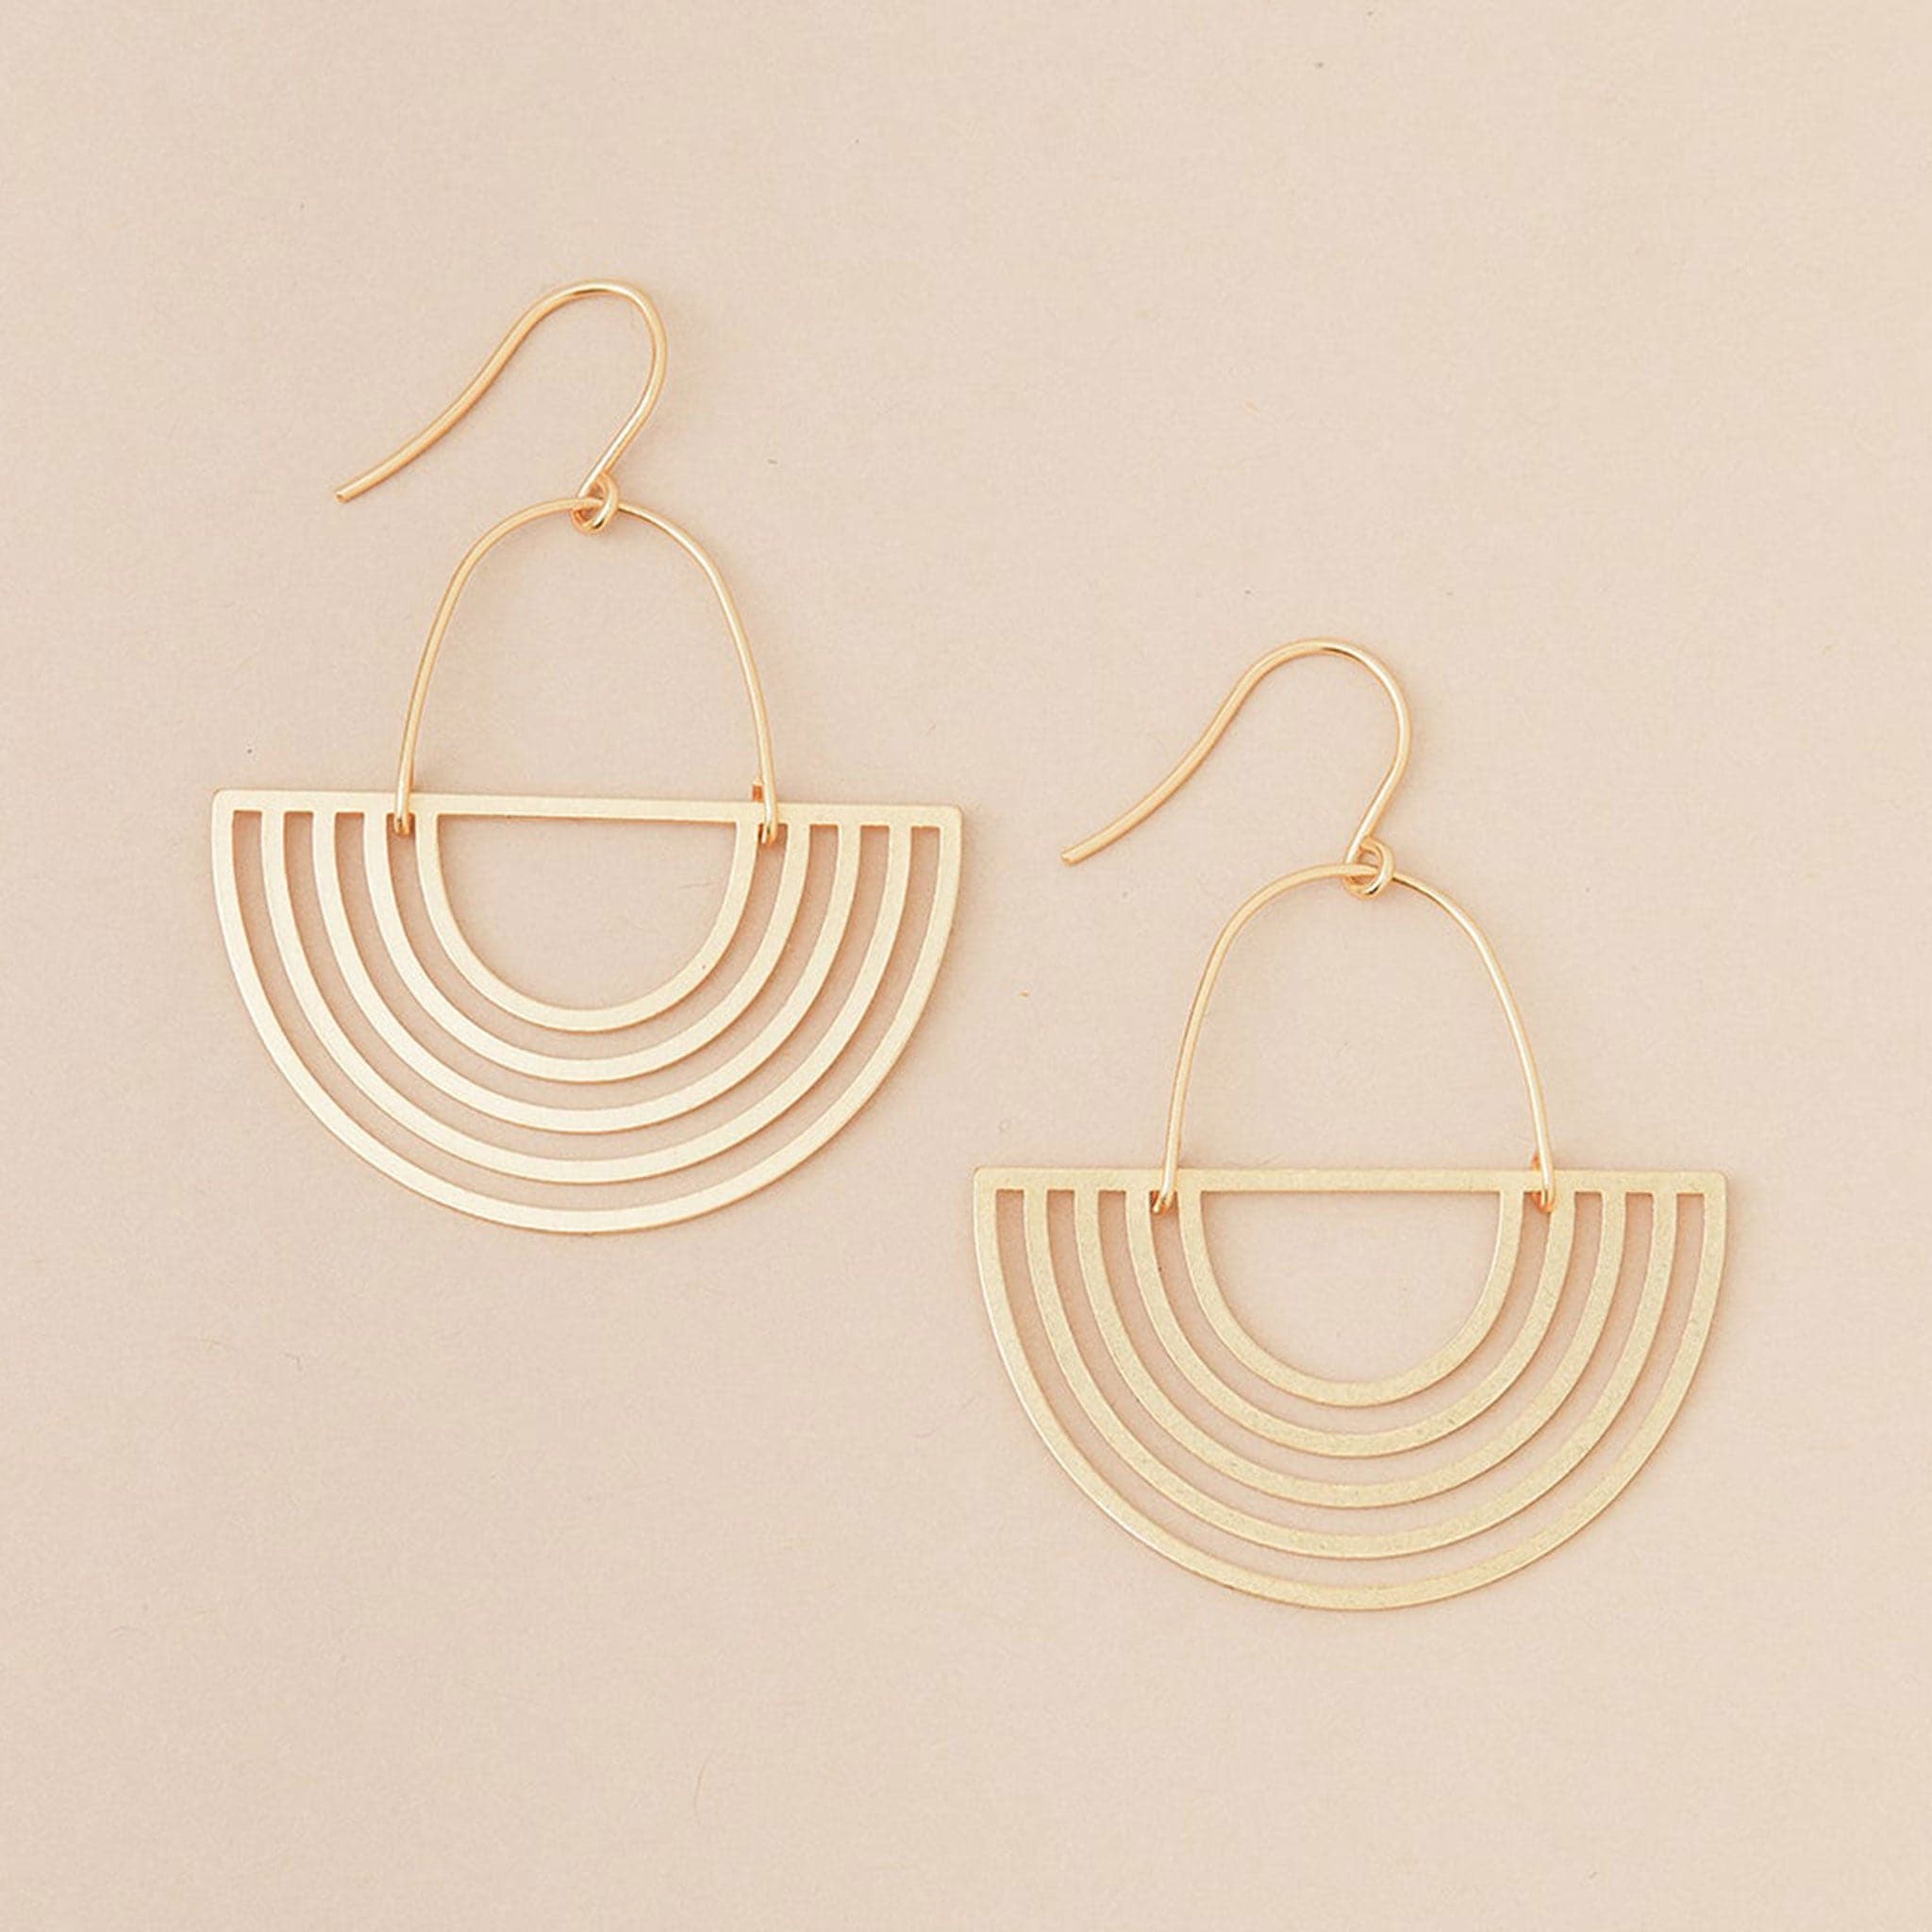 Two gold upside down arch earrings with a gold wire finding.